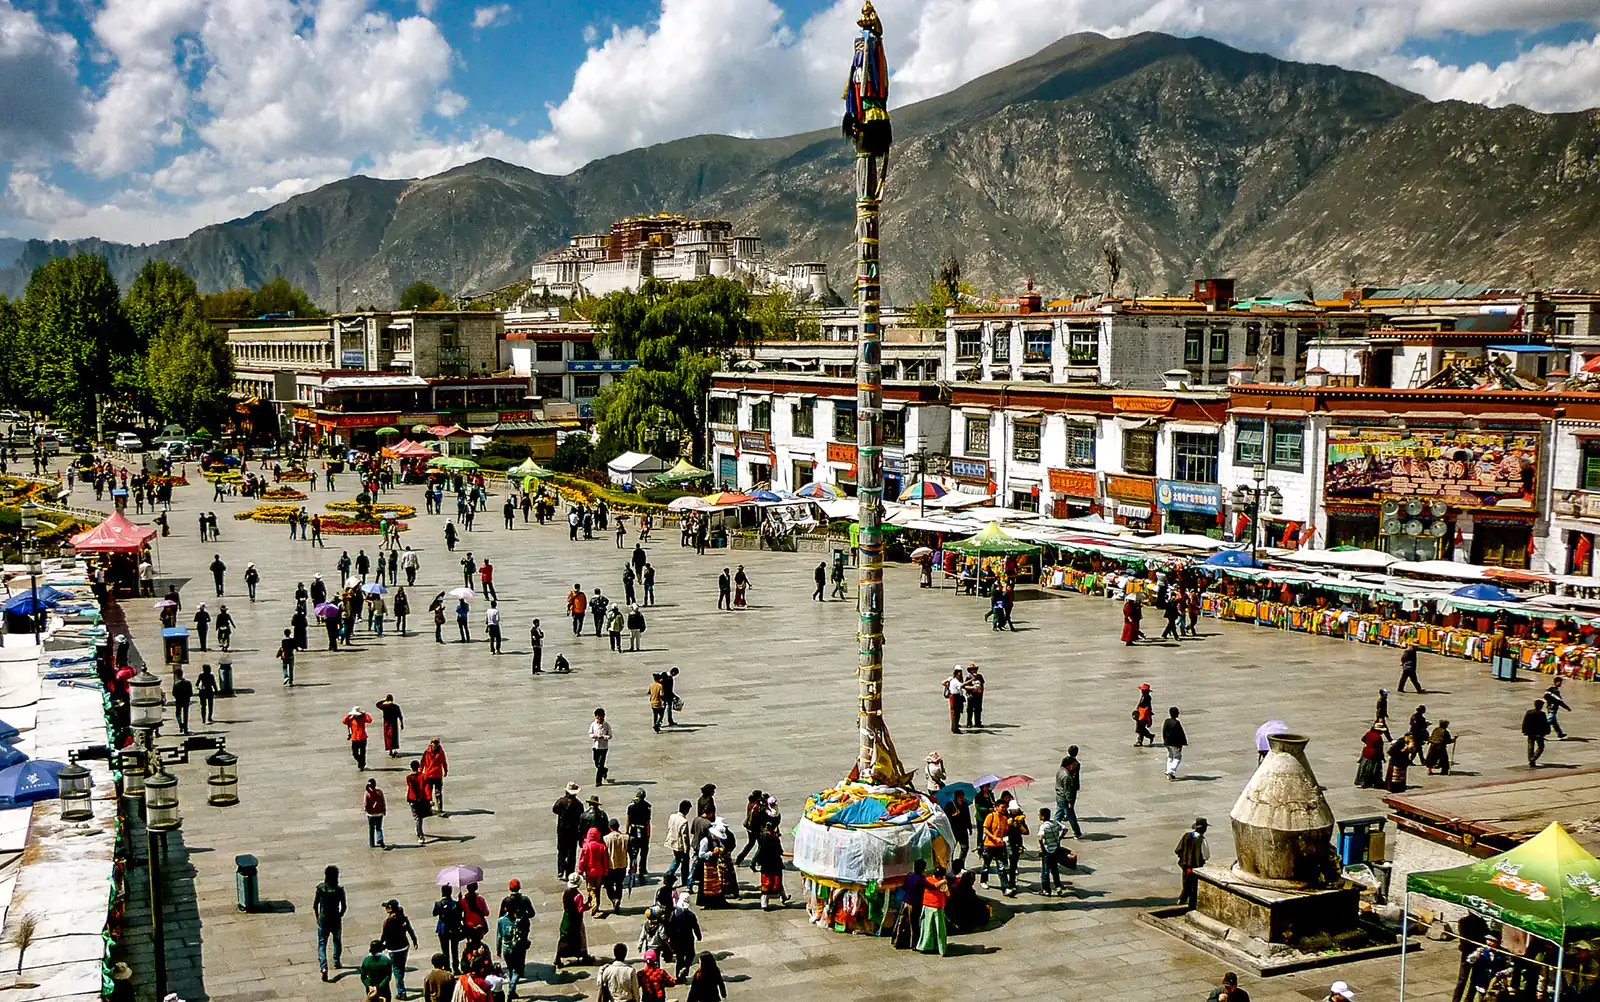 Barkhor square from the rooftop of the Jokhang temple